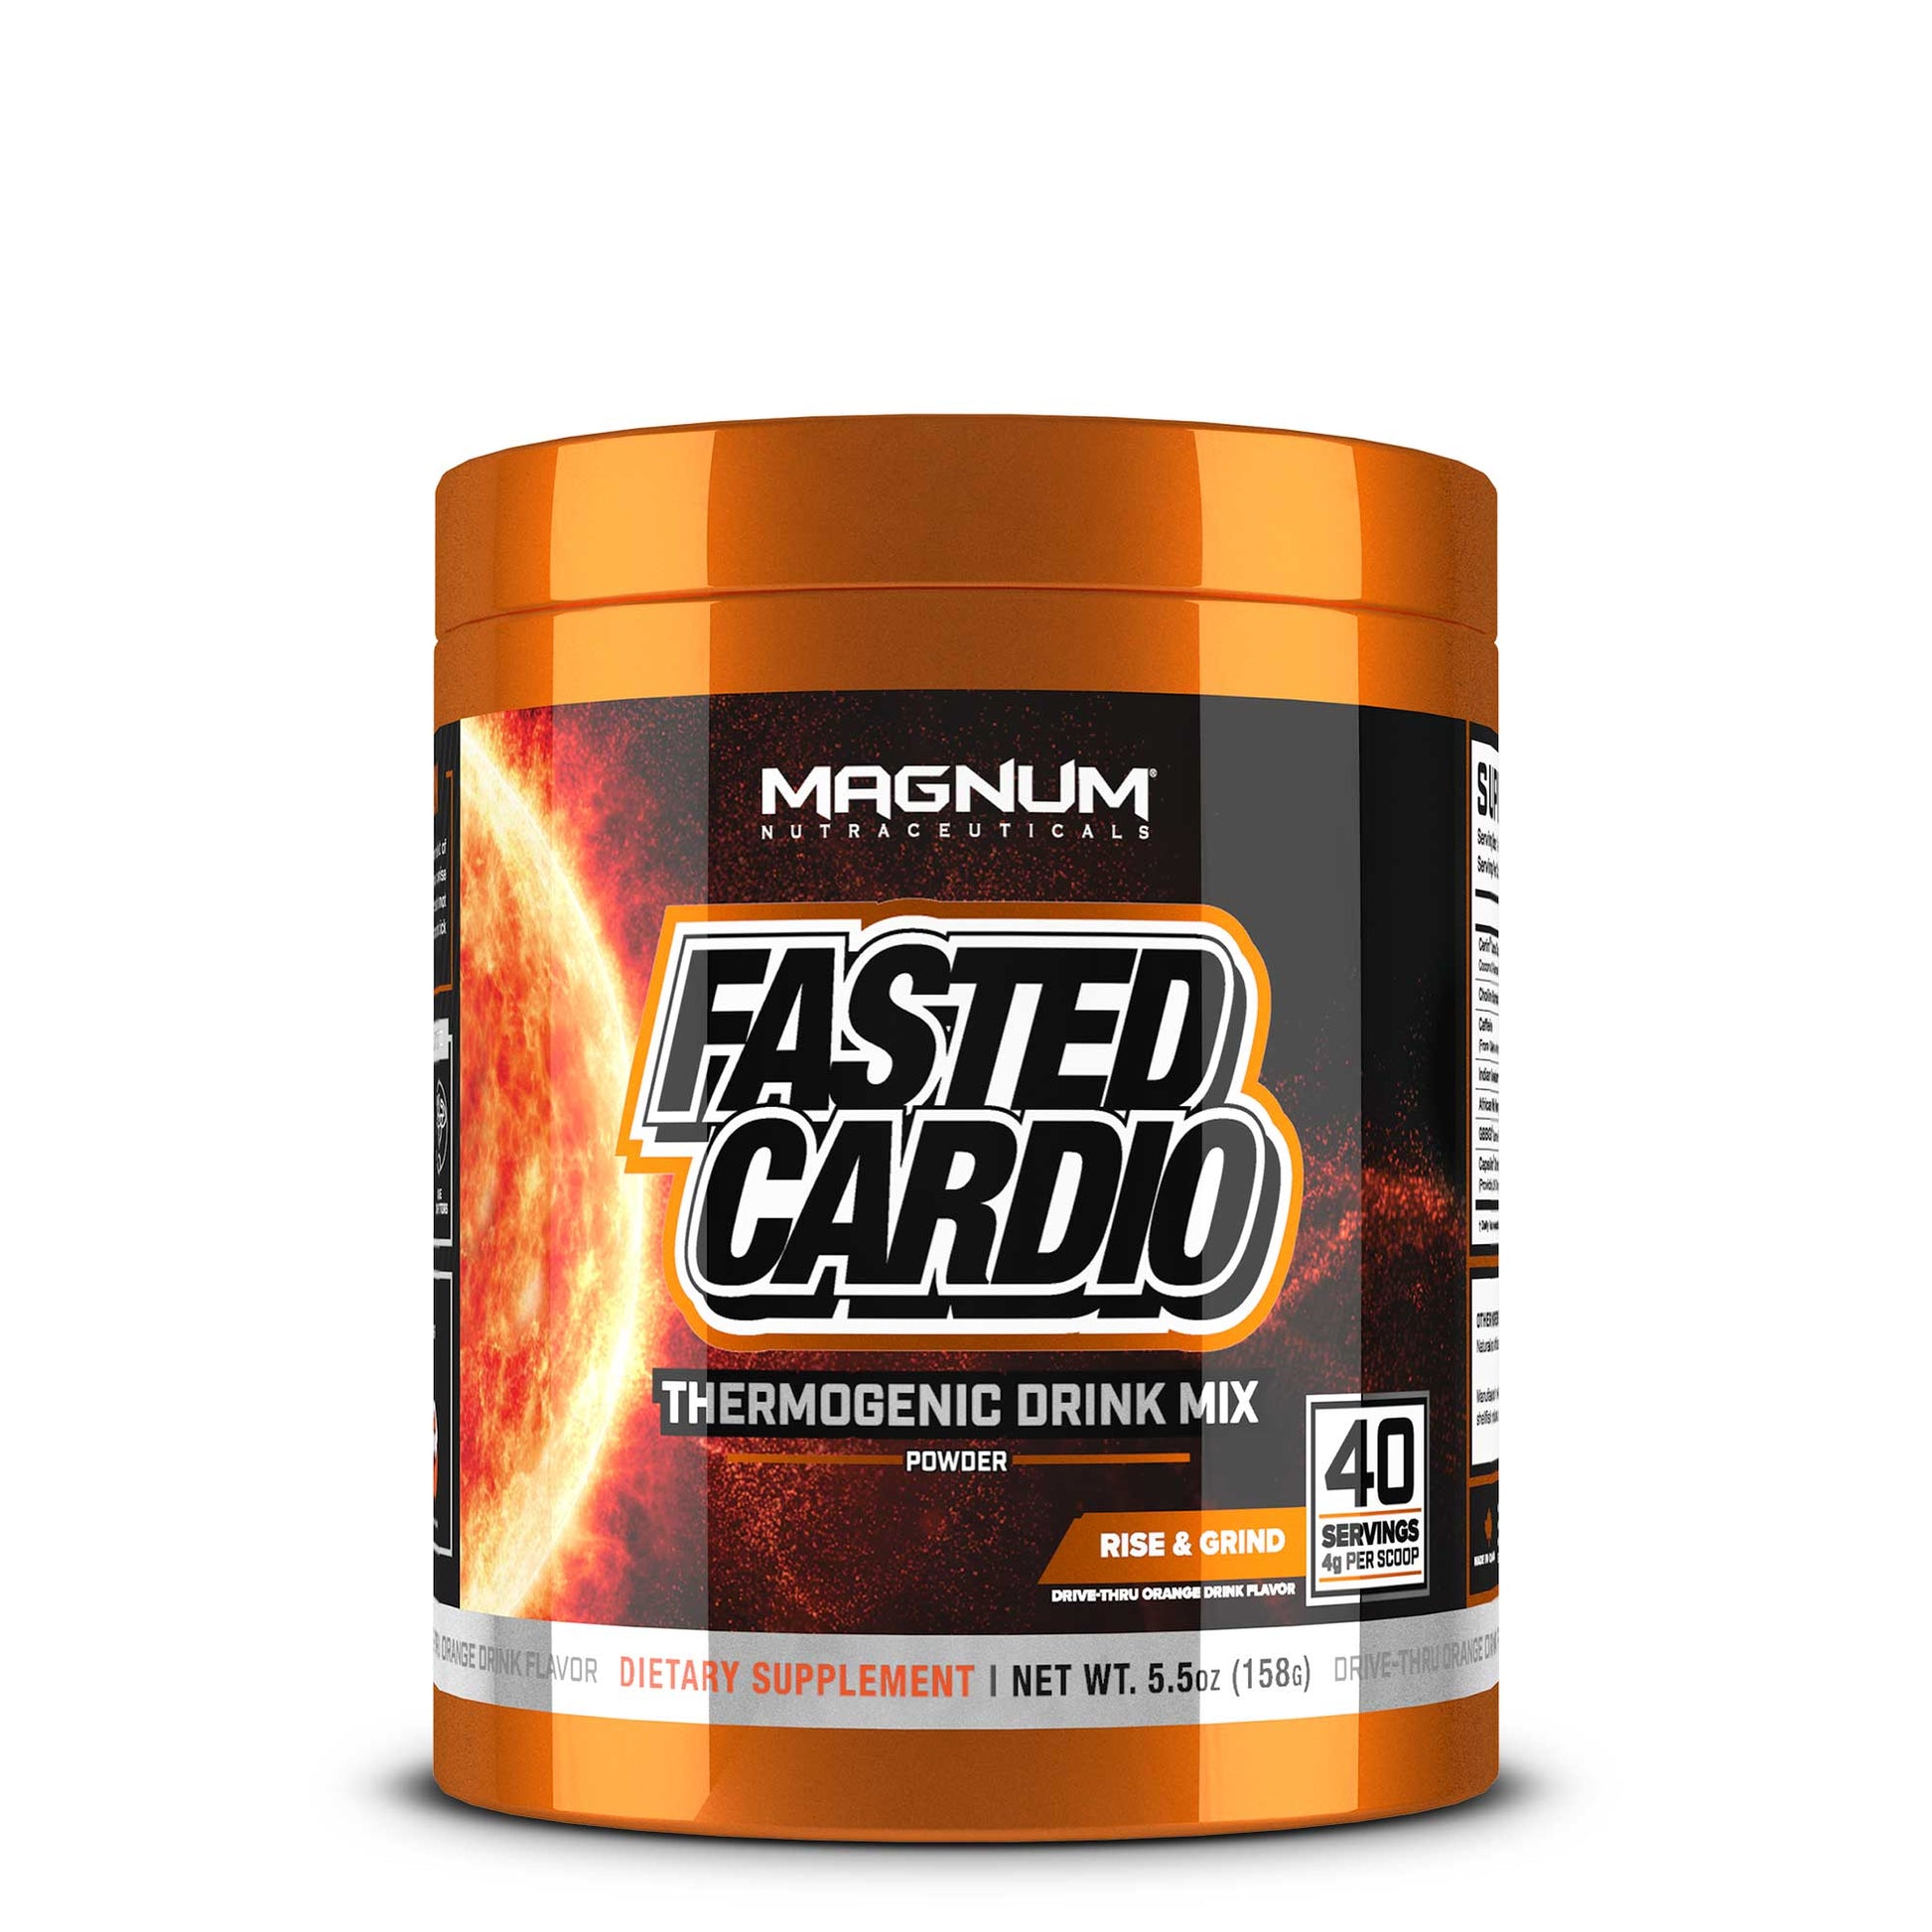 Fasted Cardio, Thermogenic Drink Mix, Rise and Grind, Drive-Thru Orange Drink flavor, 40 servings